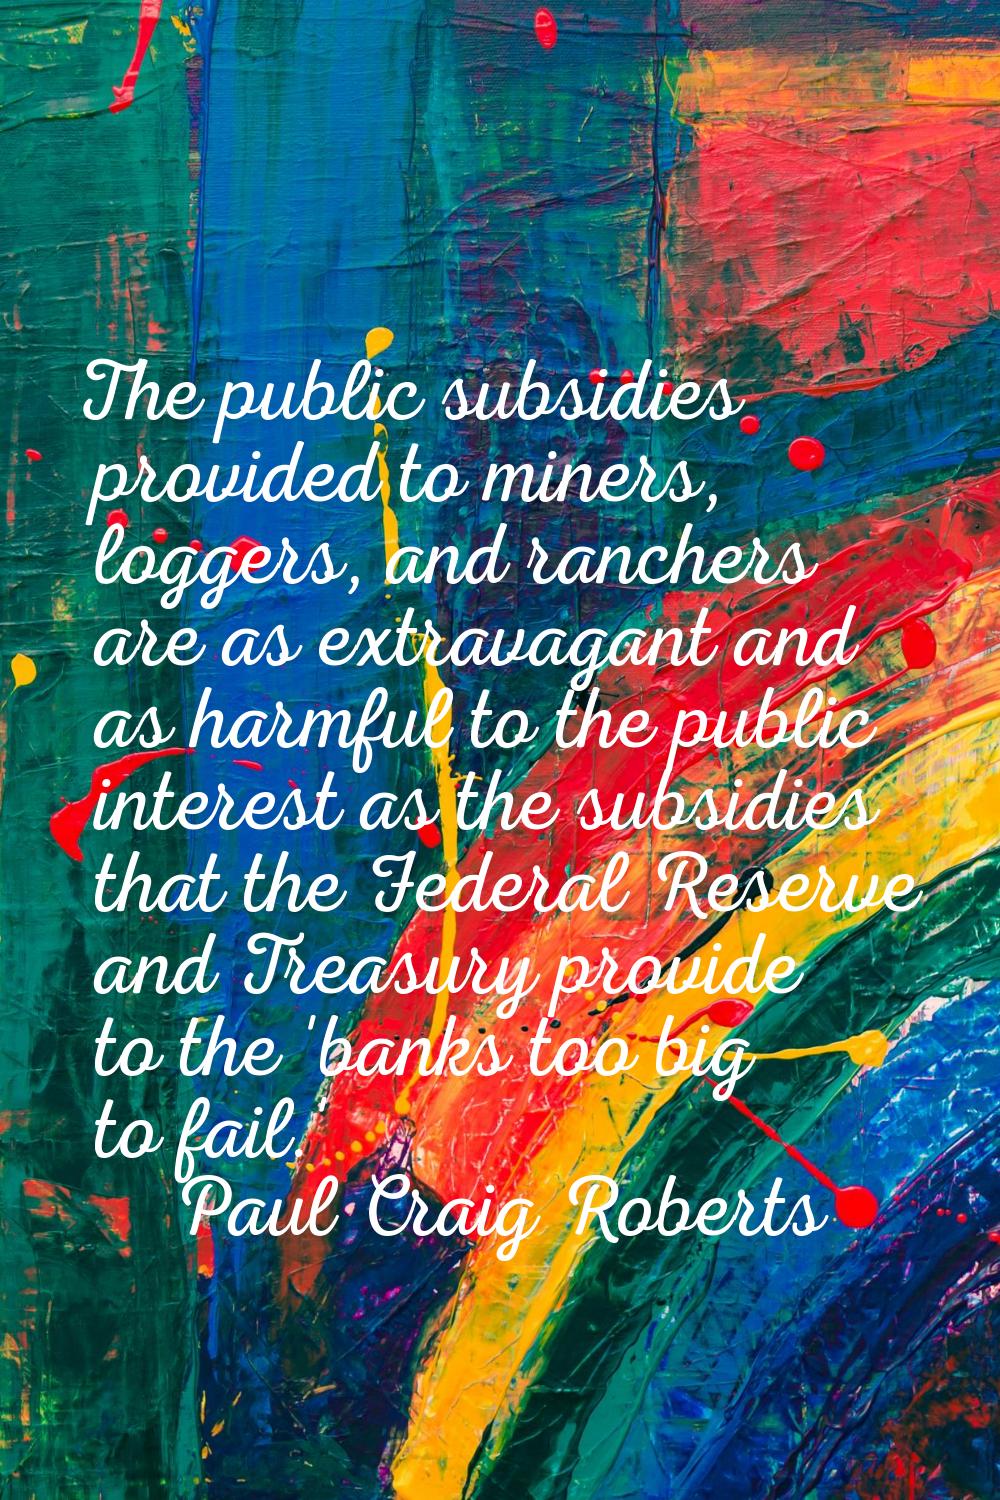 The public subsidies provided to miners, loggers, and ranchers are as extravagant and as harmful to